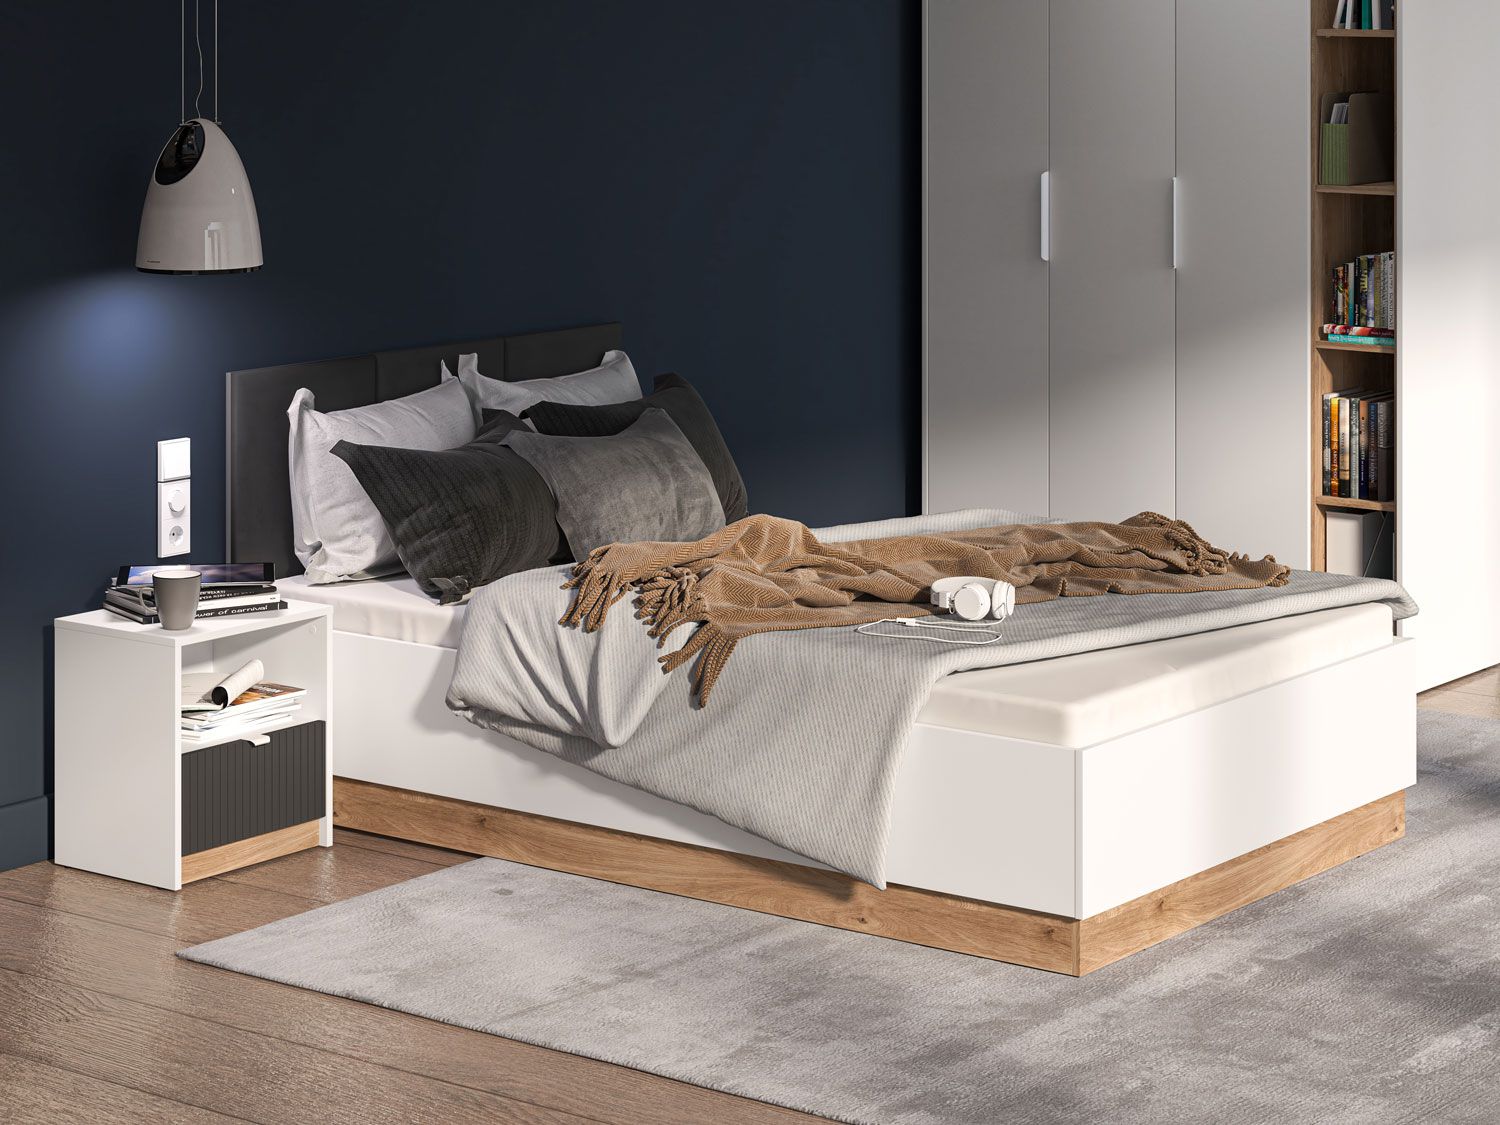 Modern youth room / guest room - set C Mackinac, 3-piece, color: white / oak / graphite matt, made of high-quality material, with soft-close system, handles: Metal, ABS edge protection